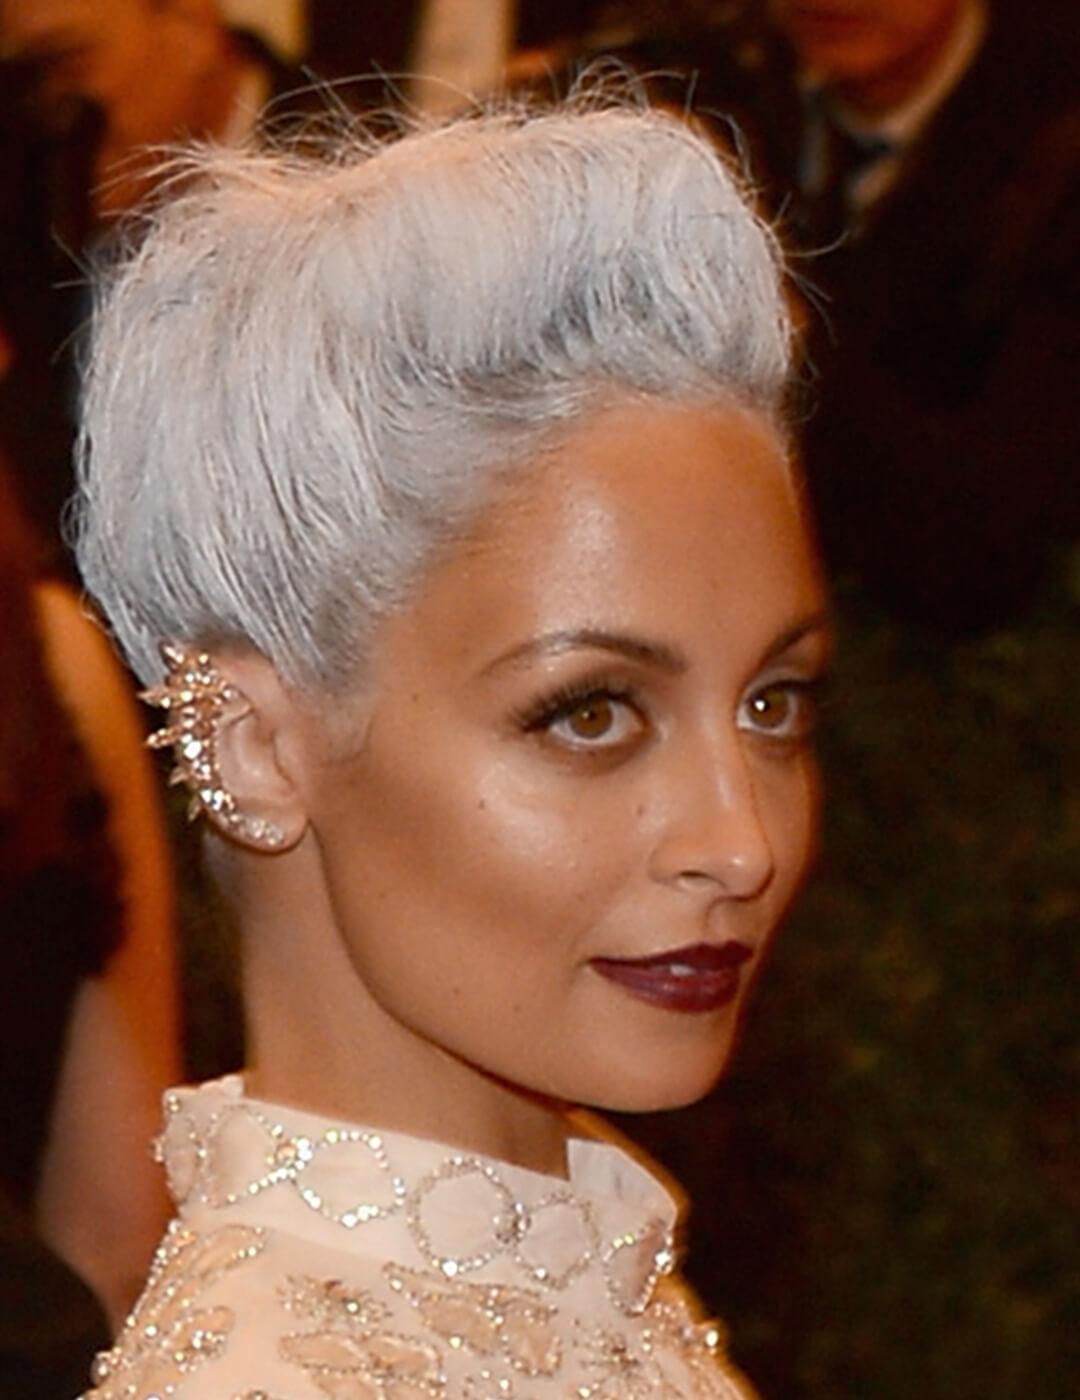 A photo of Nicole Richie with a short gray colored hairstyle